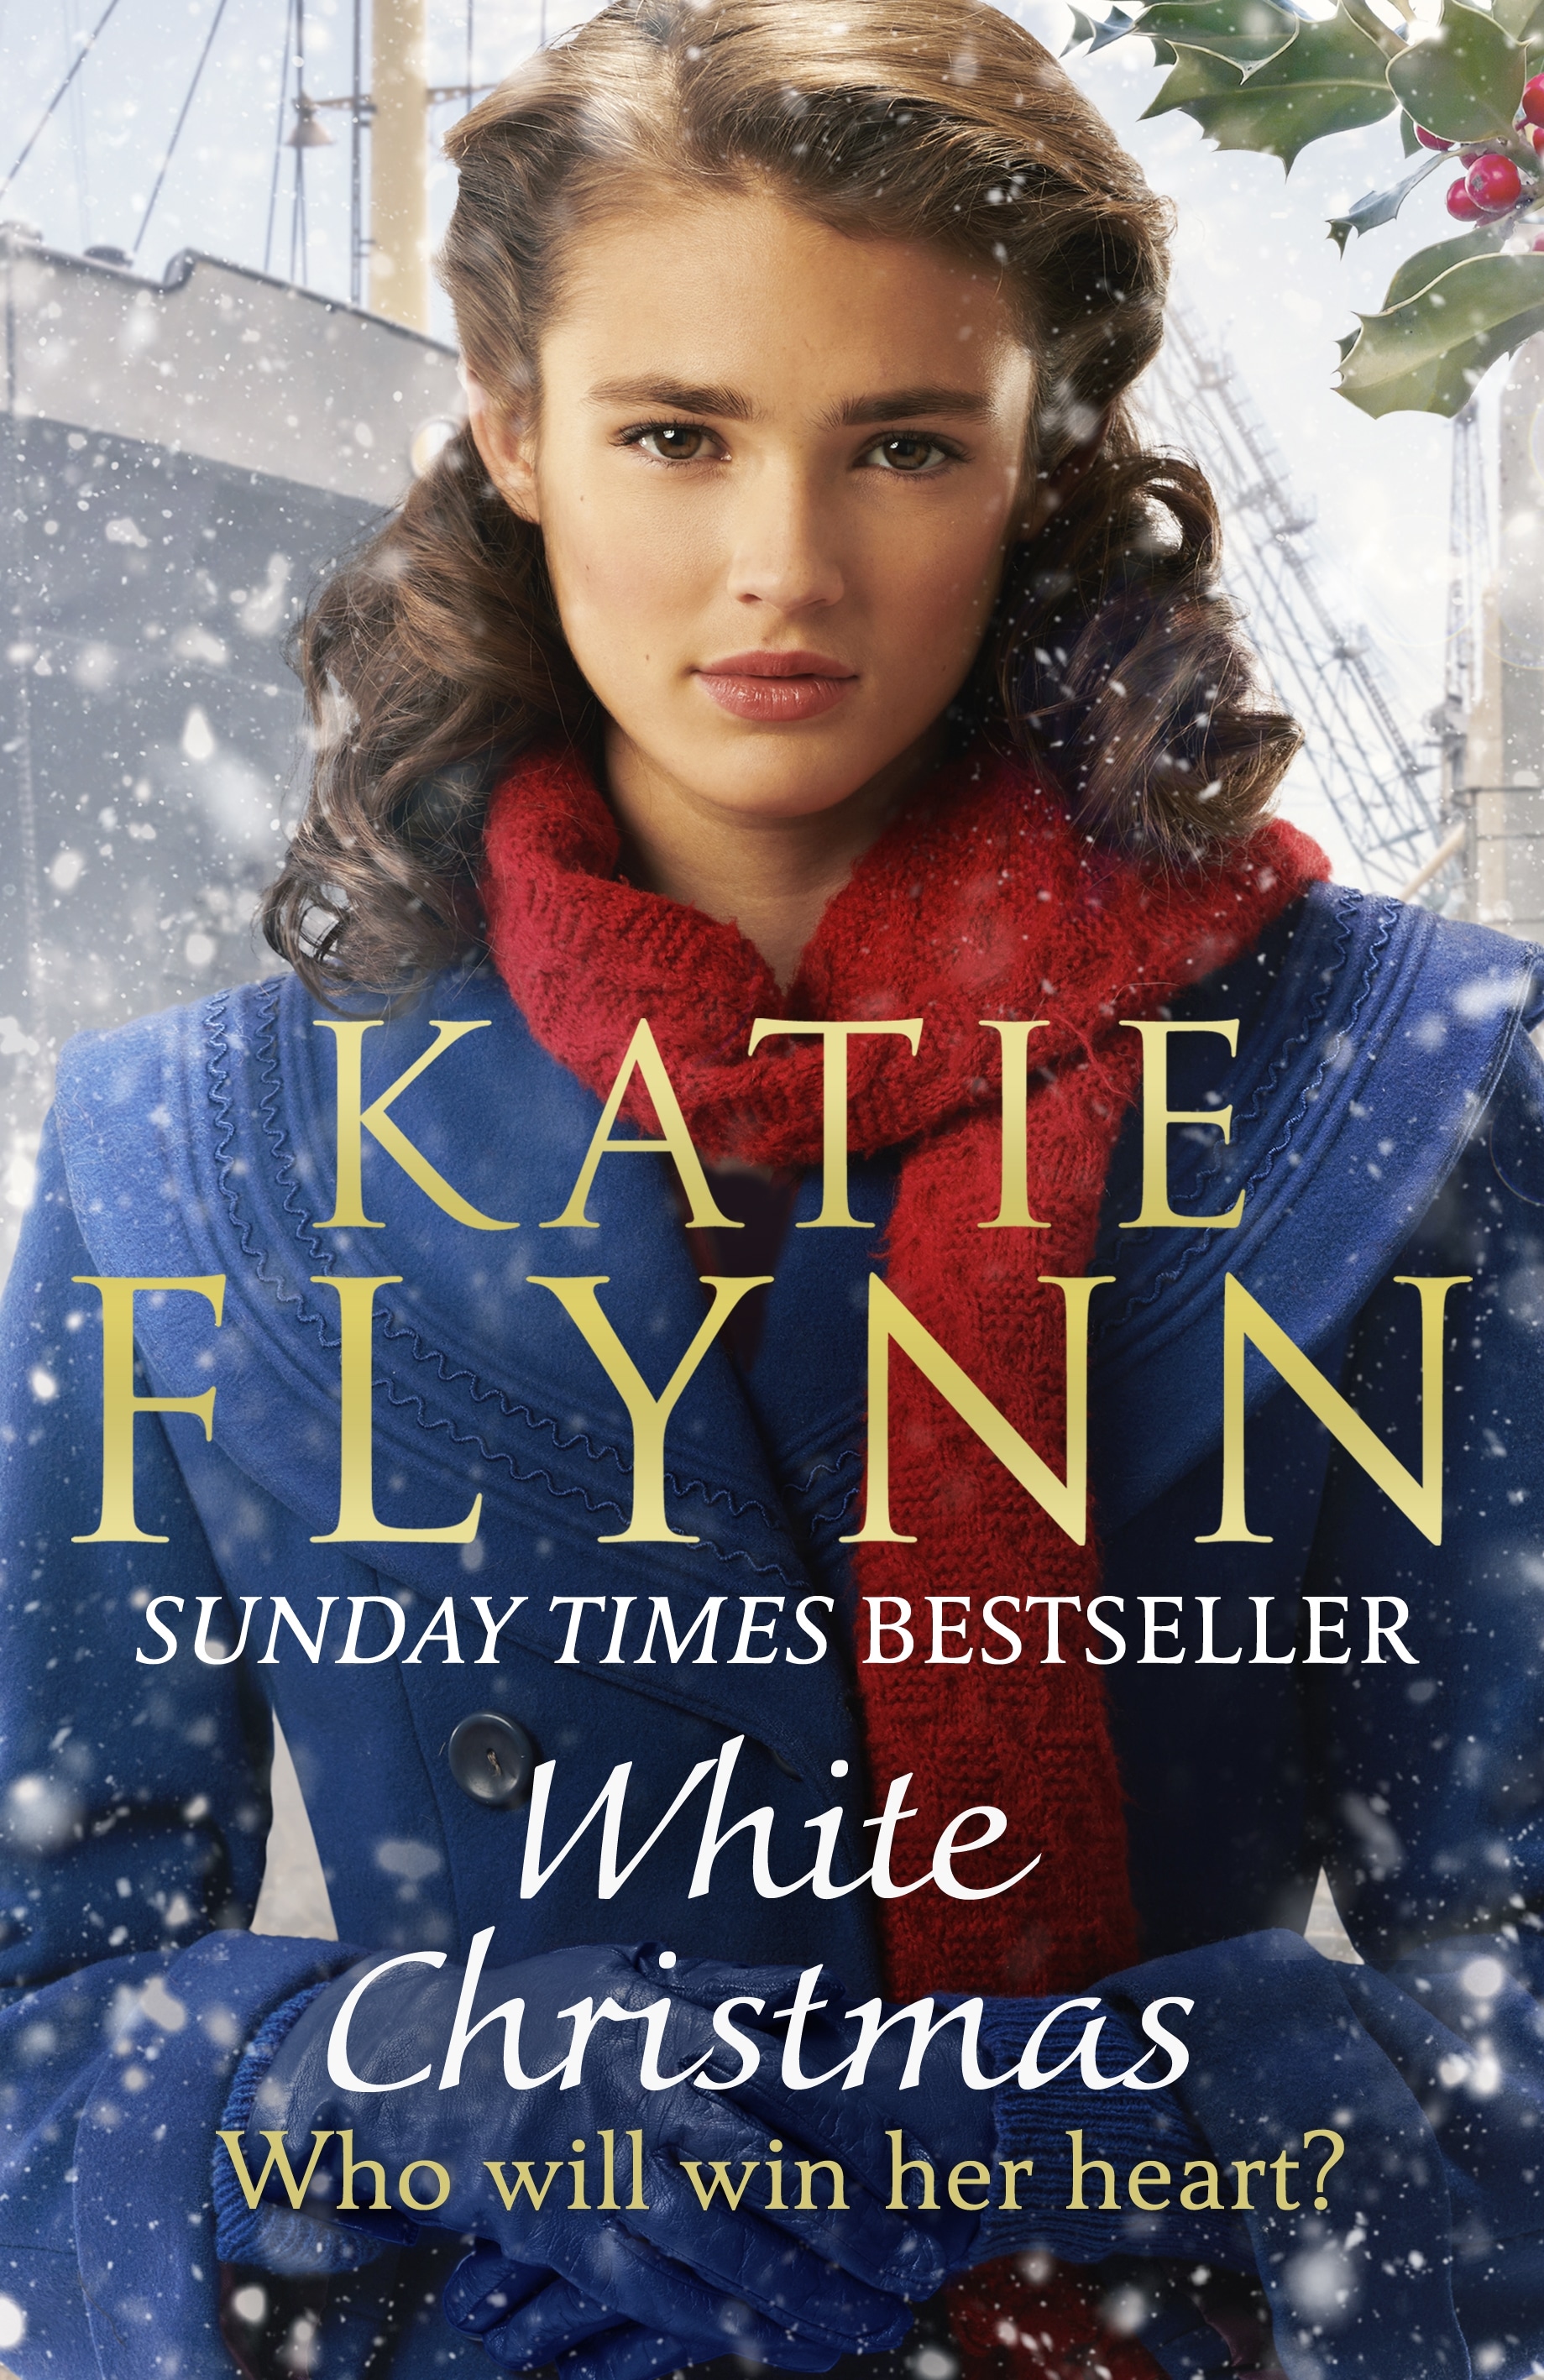 Book “White Christmas” by Katie Flynn — August 19, 2021